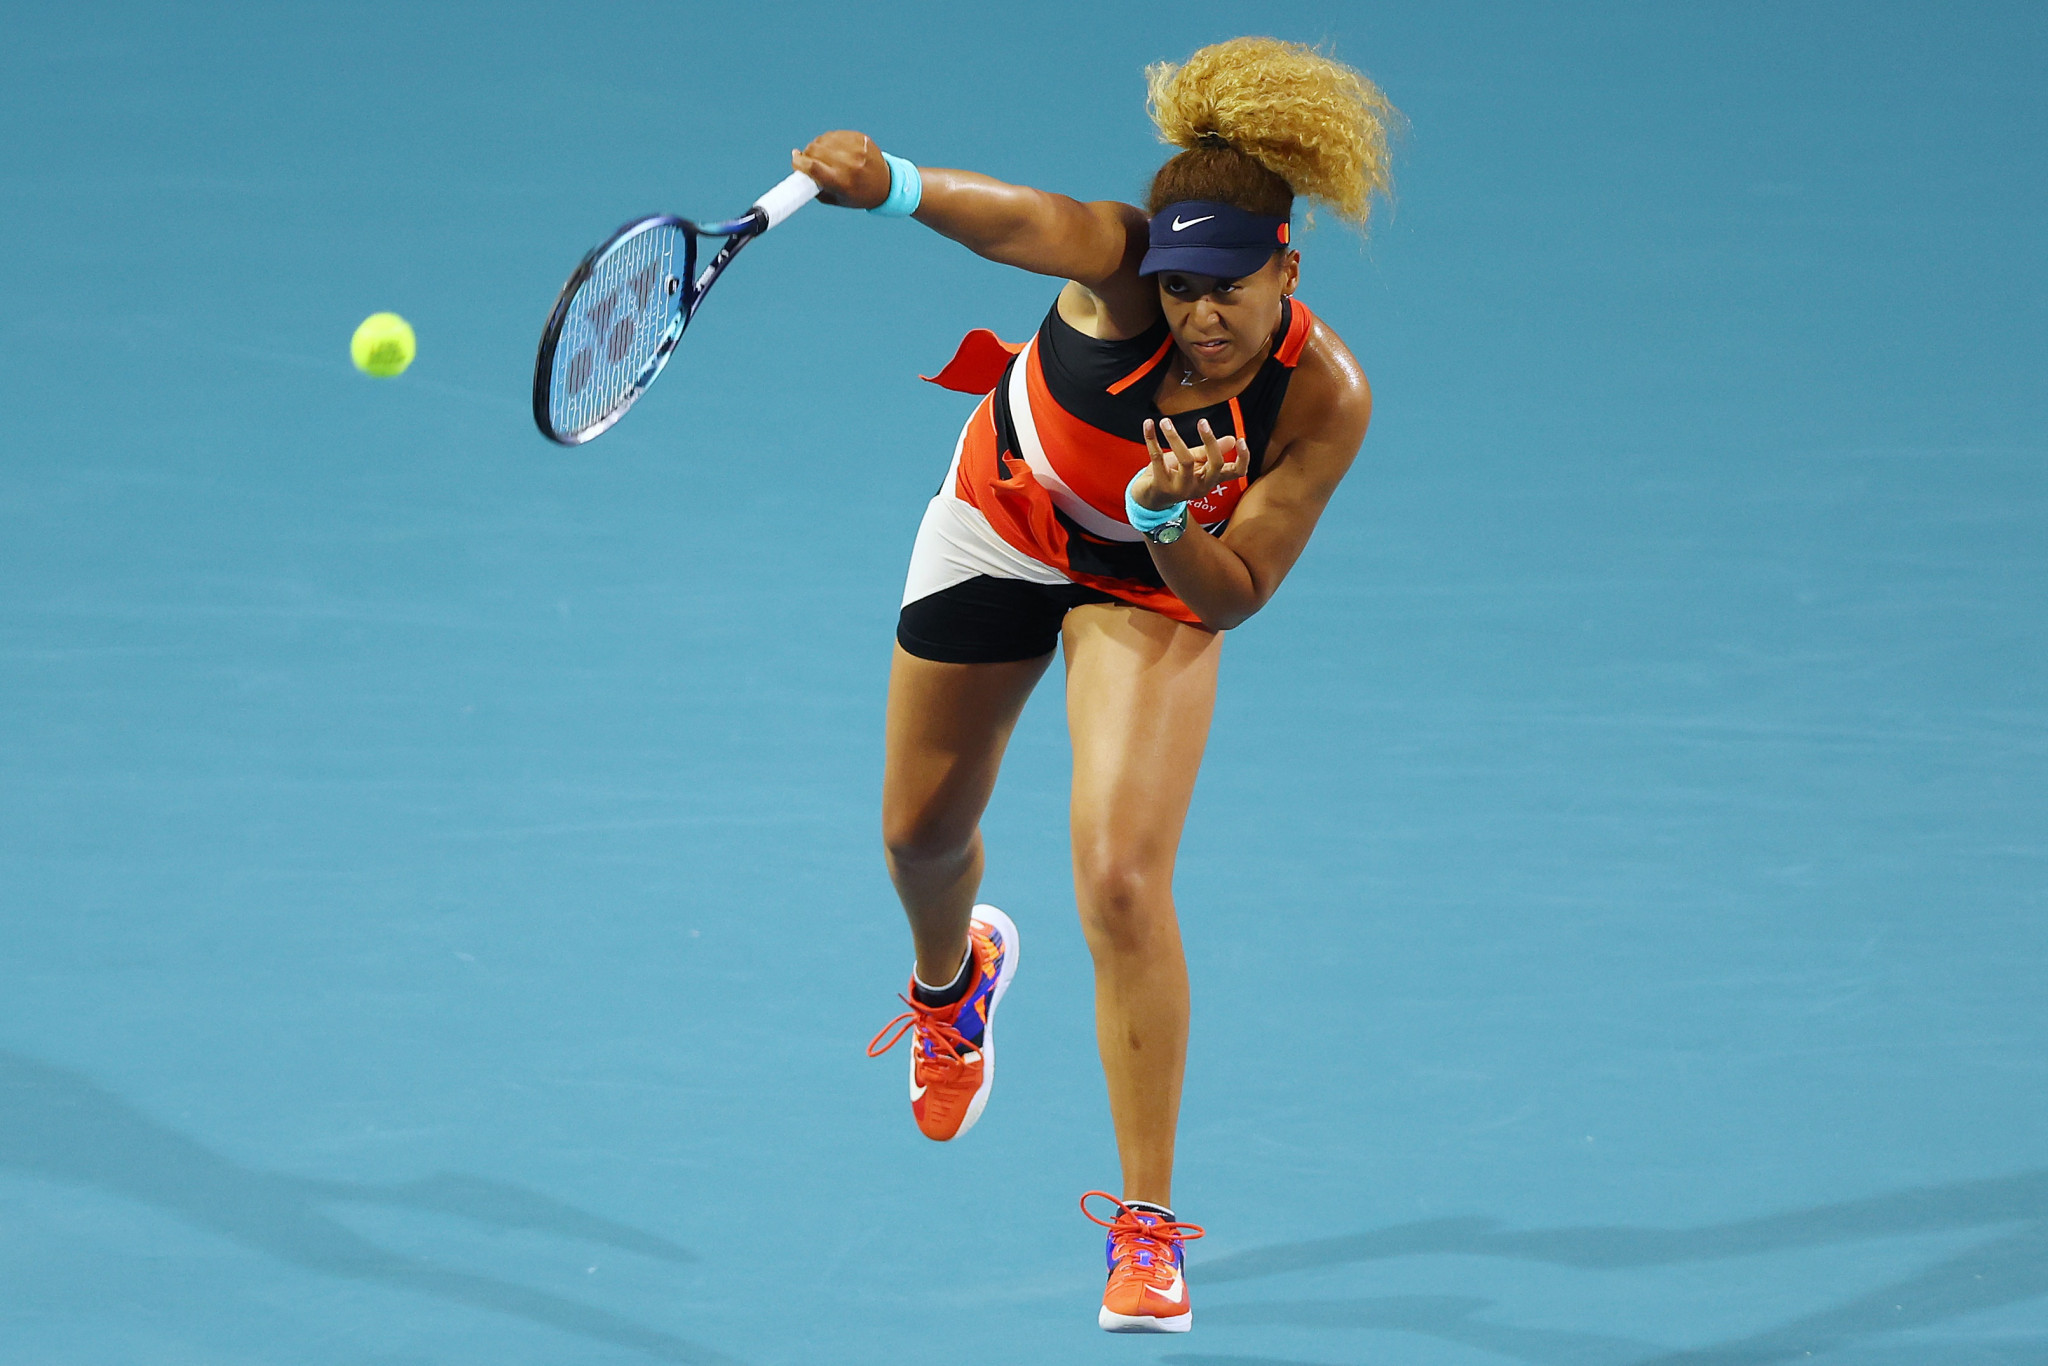 Japan's Naomi Osaka is set to tackle Belinda Bencic in the women's singles semi-final after cruising past Danielle Collins ©Getty Images 